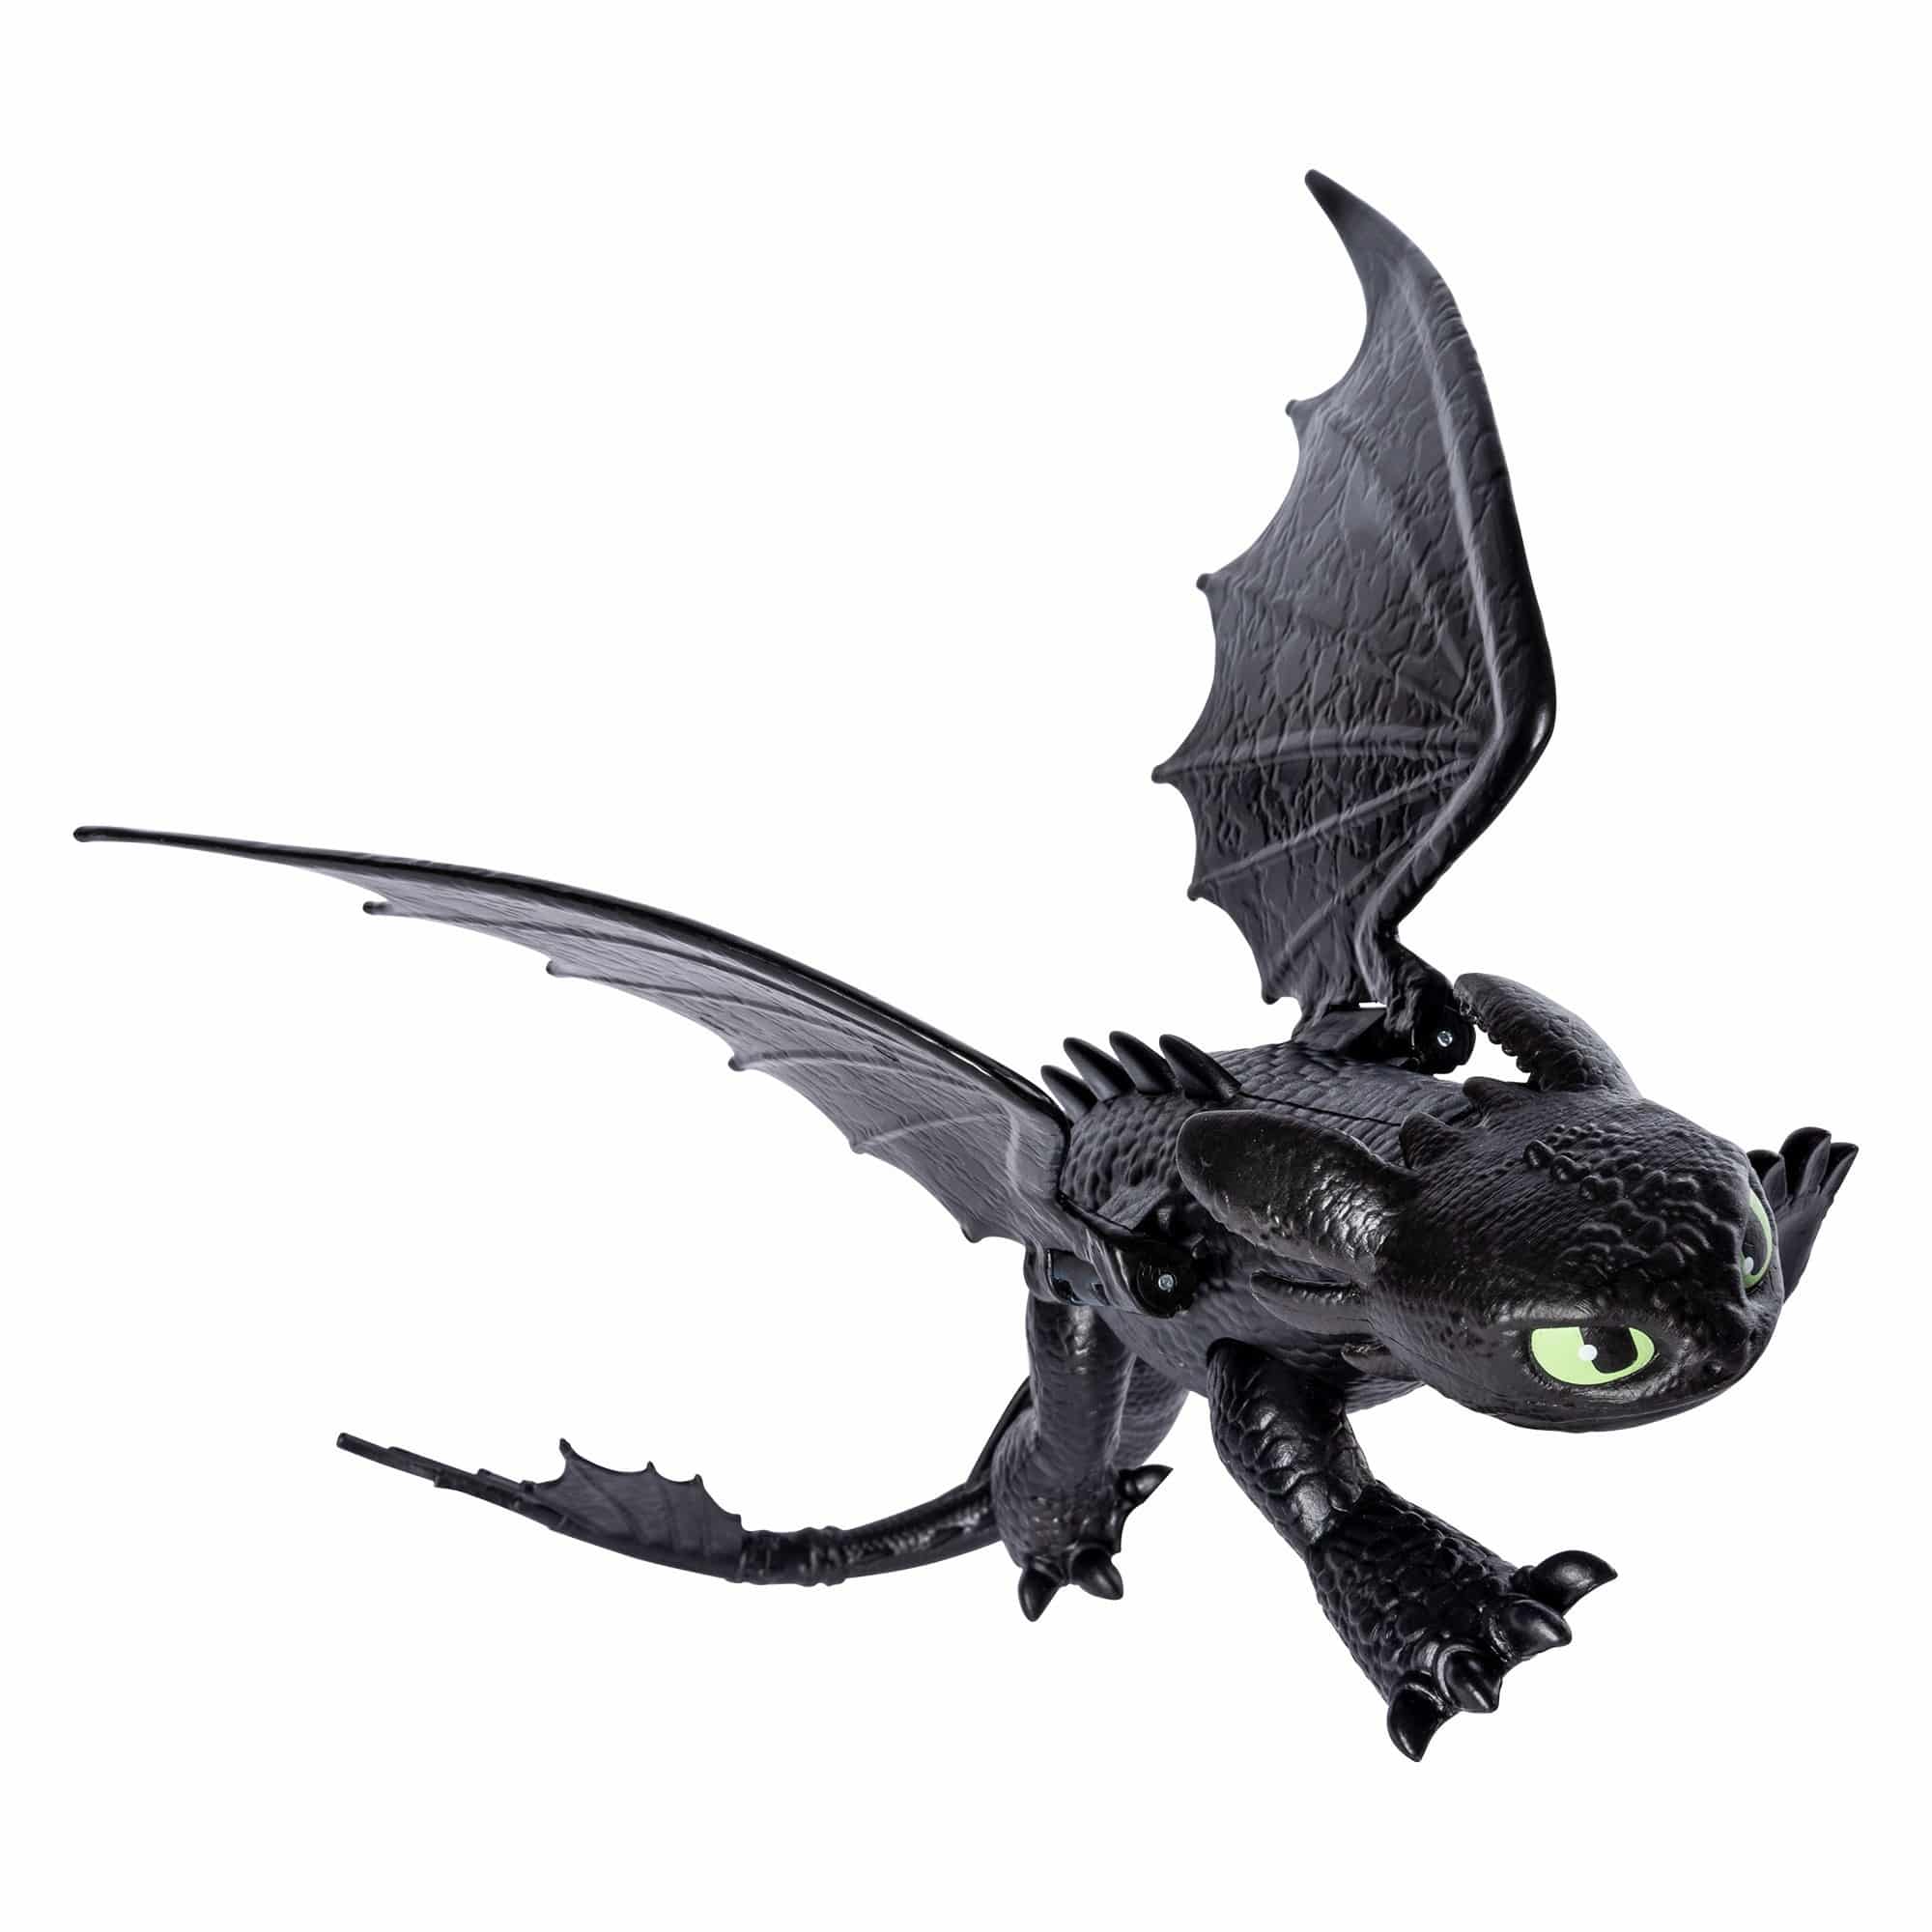 Dreamworks - How To Train Your Dragon 3 - Toothless Dragon Figure